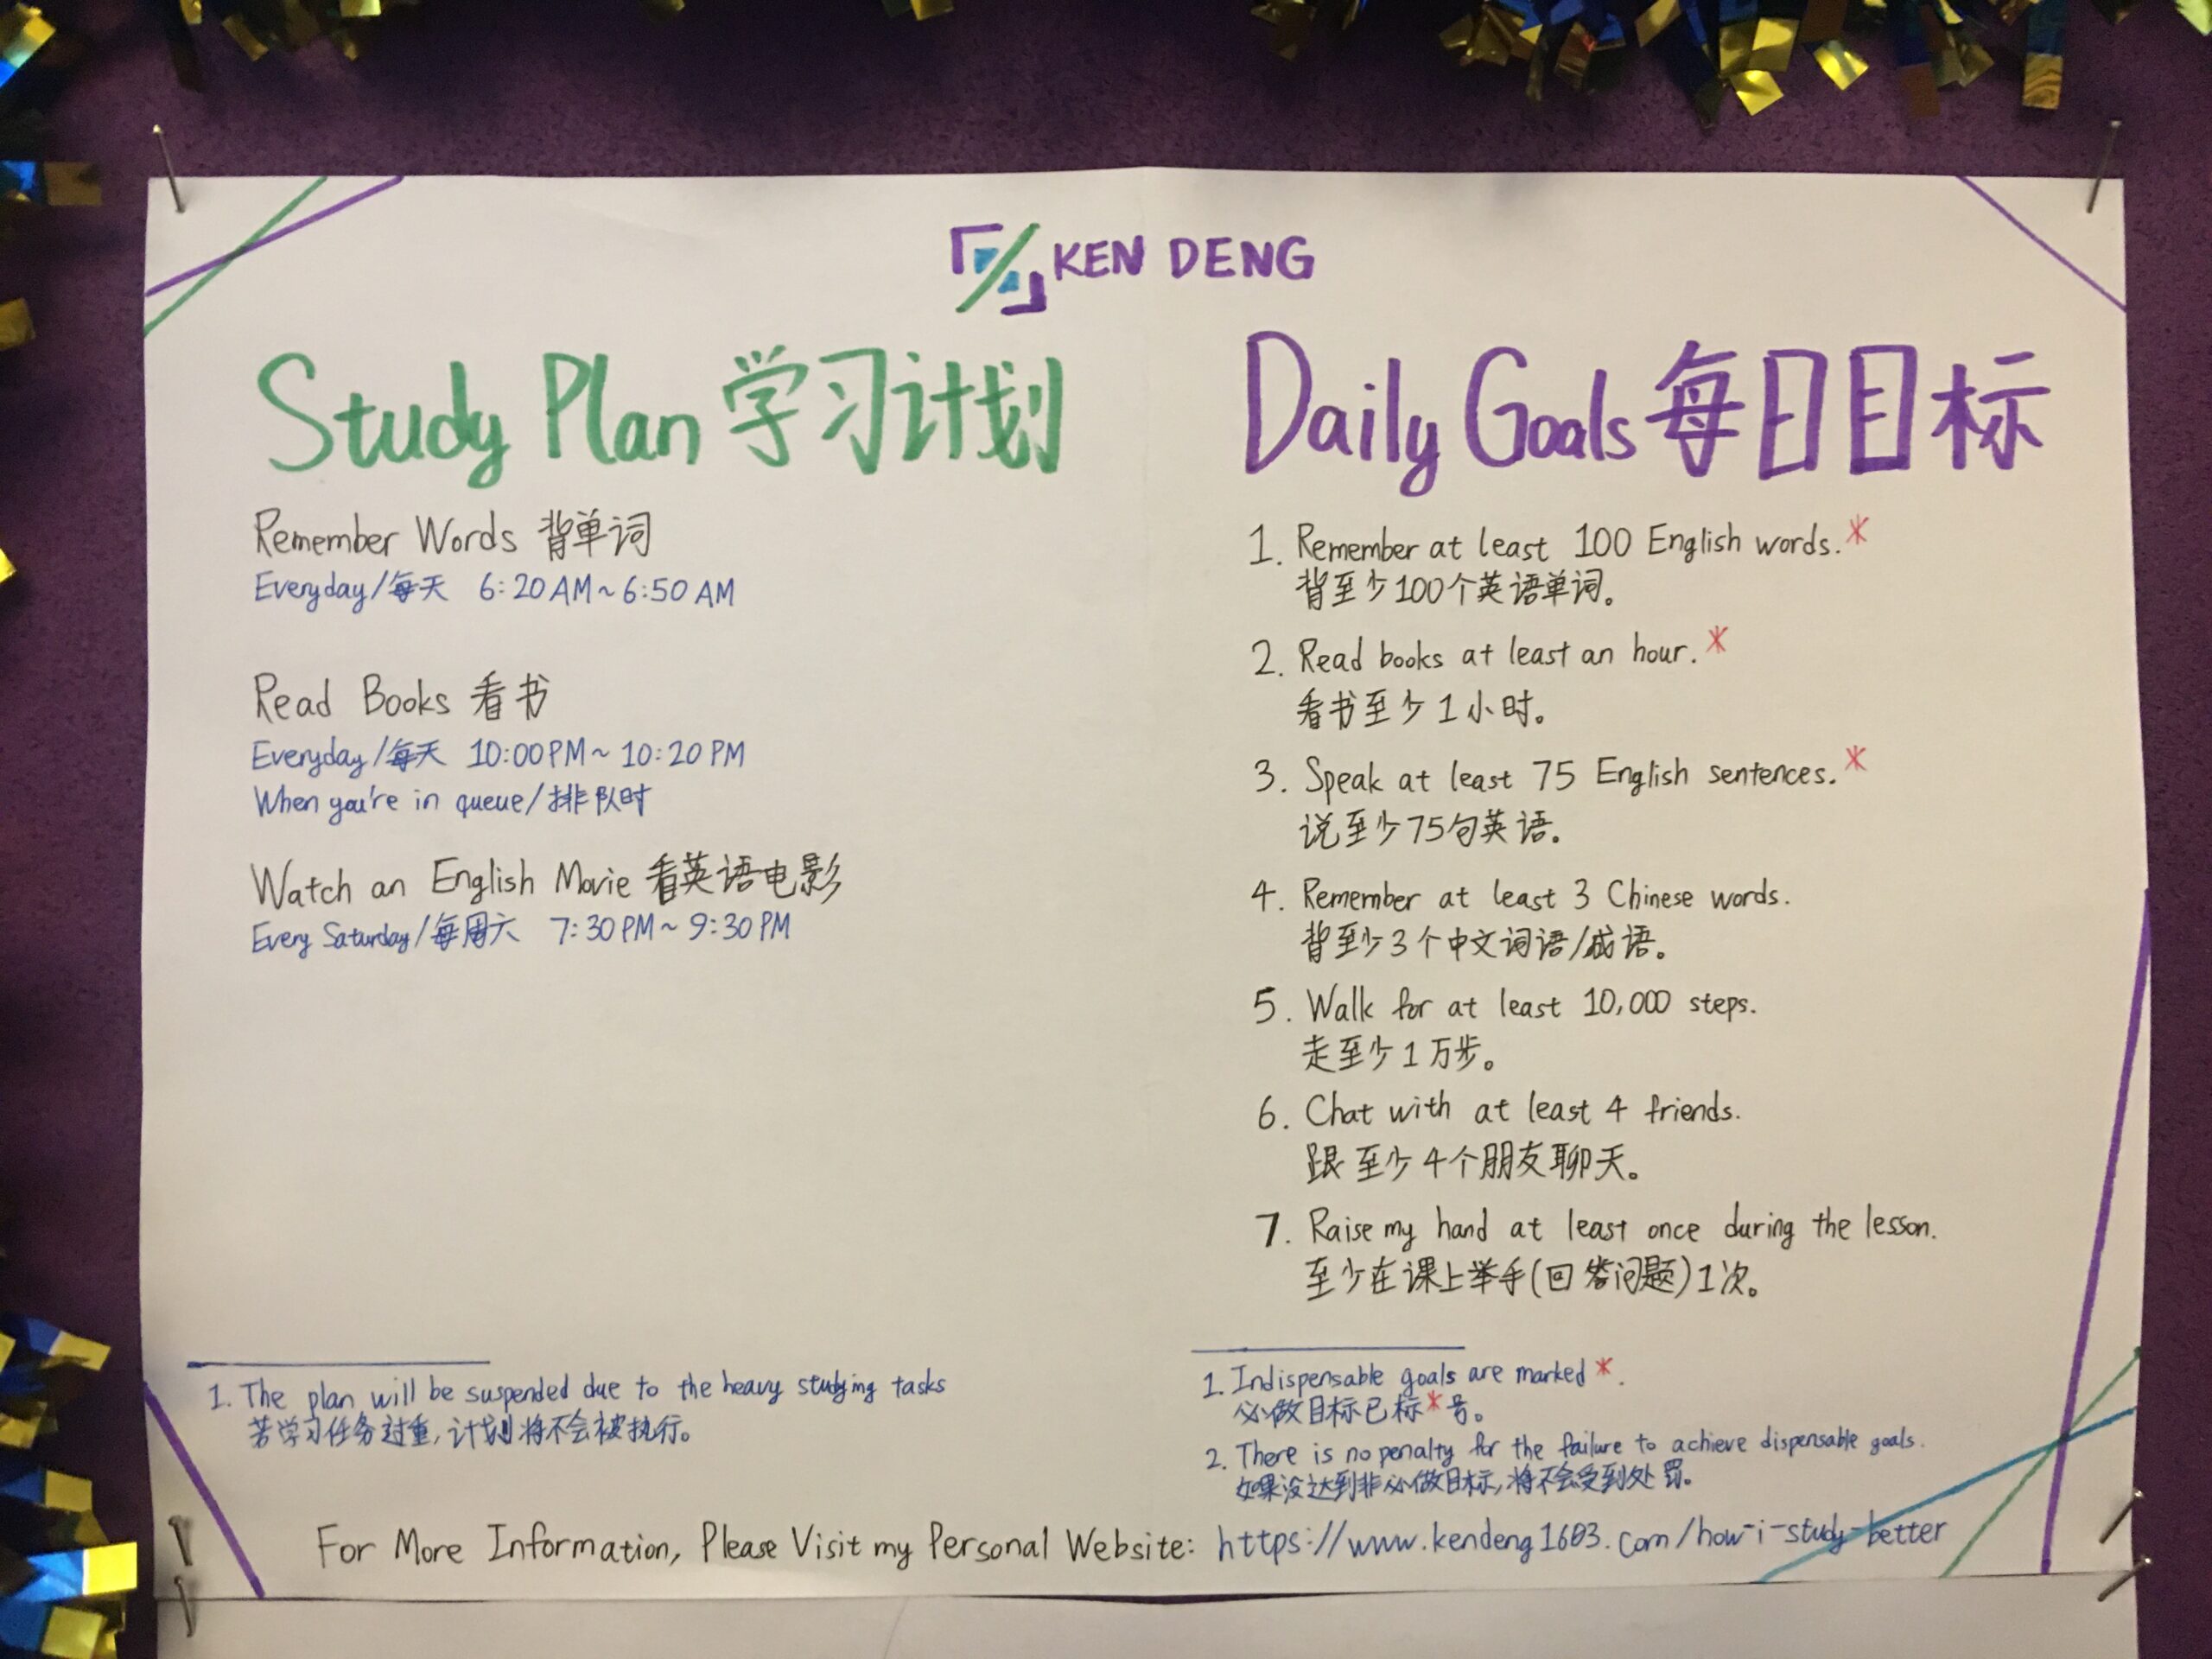 My 2020 Study Plan and Daily Goals